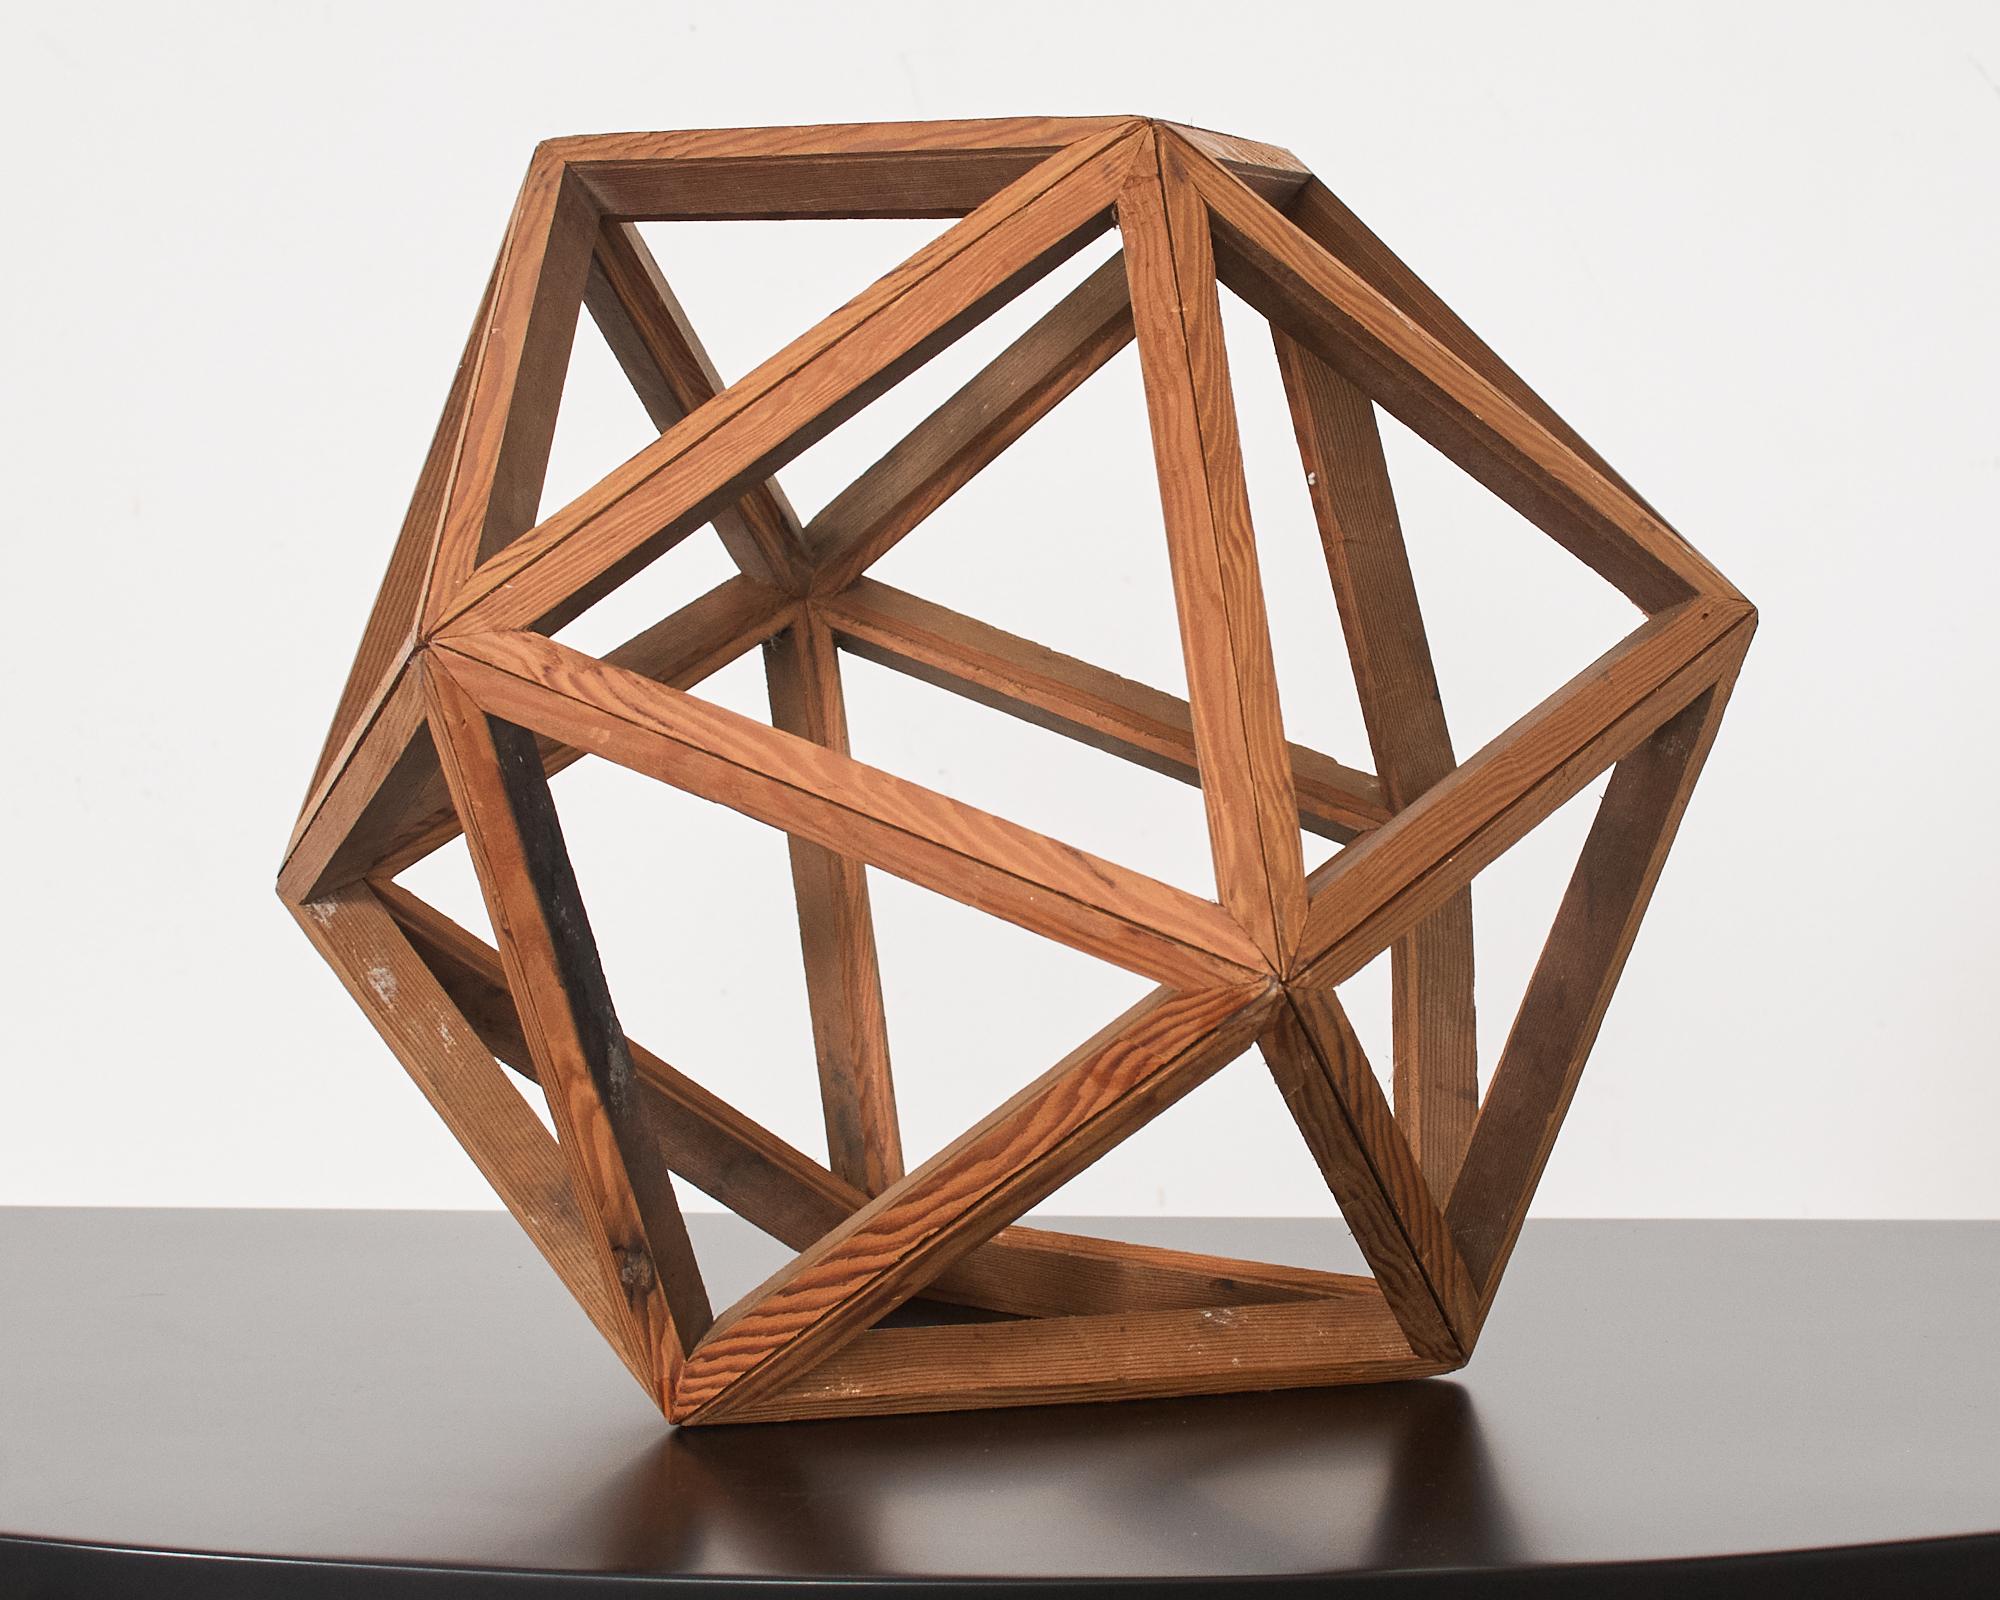 Wooden Geometric Icosahedron Objet D' Art In Good Condition For Sale In Rio Vista, CA